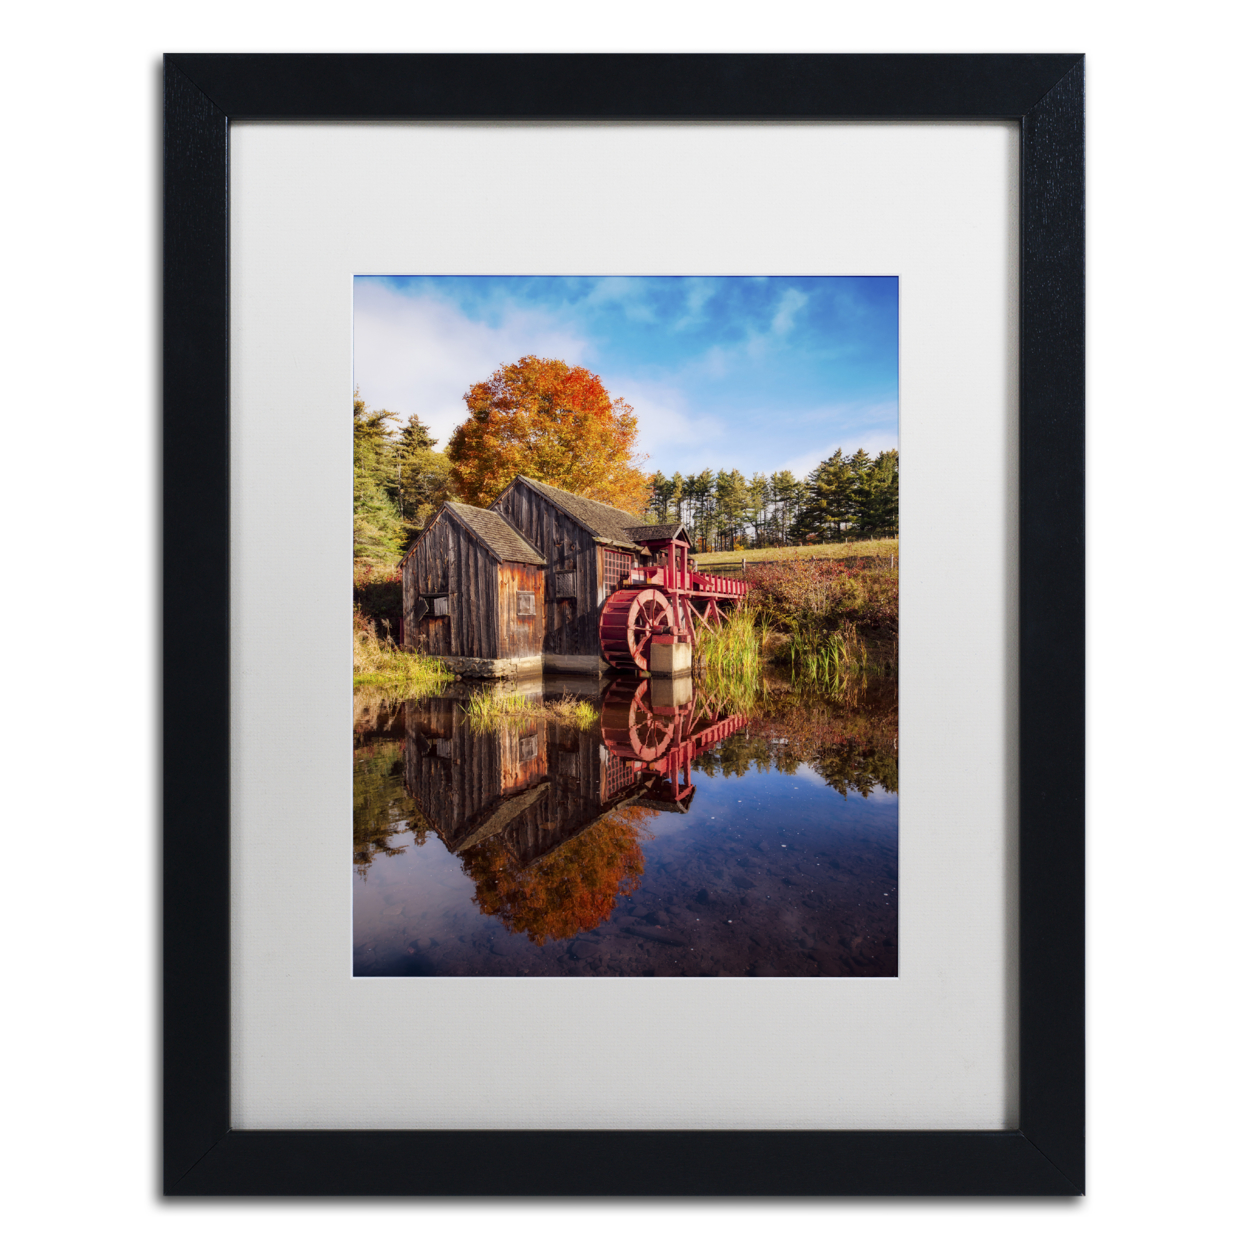 Michael Blanchette Photography 'The Old Grist Mill' Black Wooden Framed Art 18 X 22 Inches